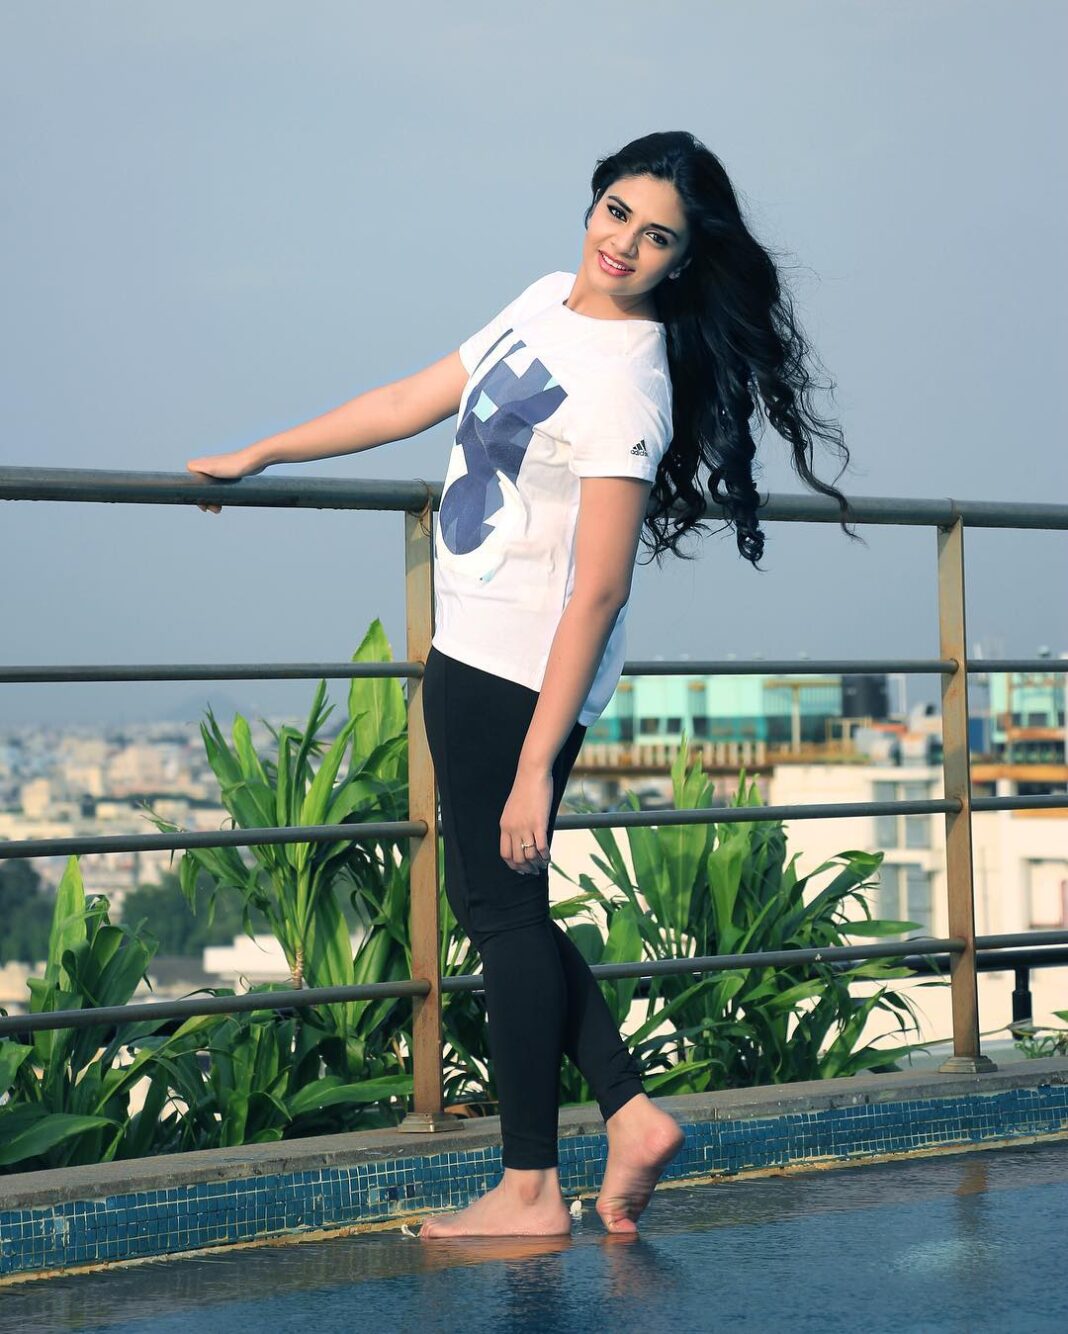 Sreemukhi Instagram - A very good morning! Back to HYD and I have realised that there are many pictures to share from the photoshoot of Vijayawada! Starting off with this! Happy Sunday guys! Love to all! #goodmorning #happysunday #happyme 😍☺️😁